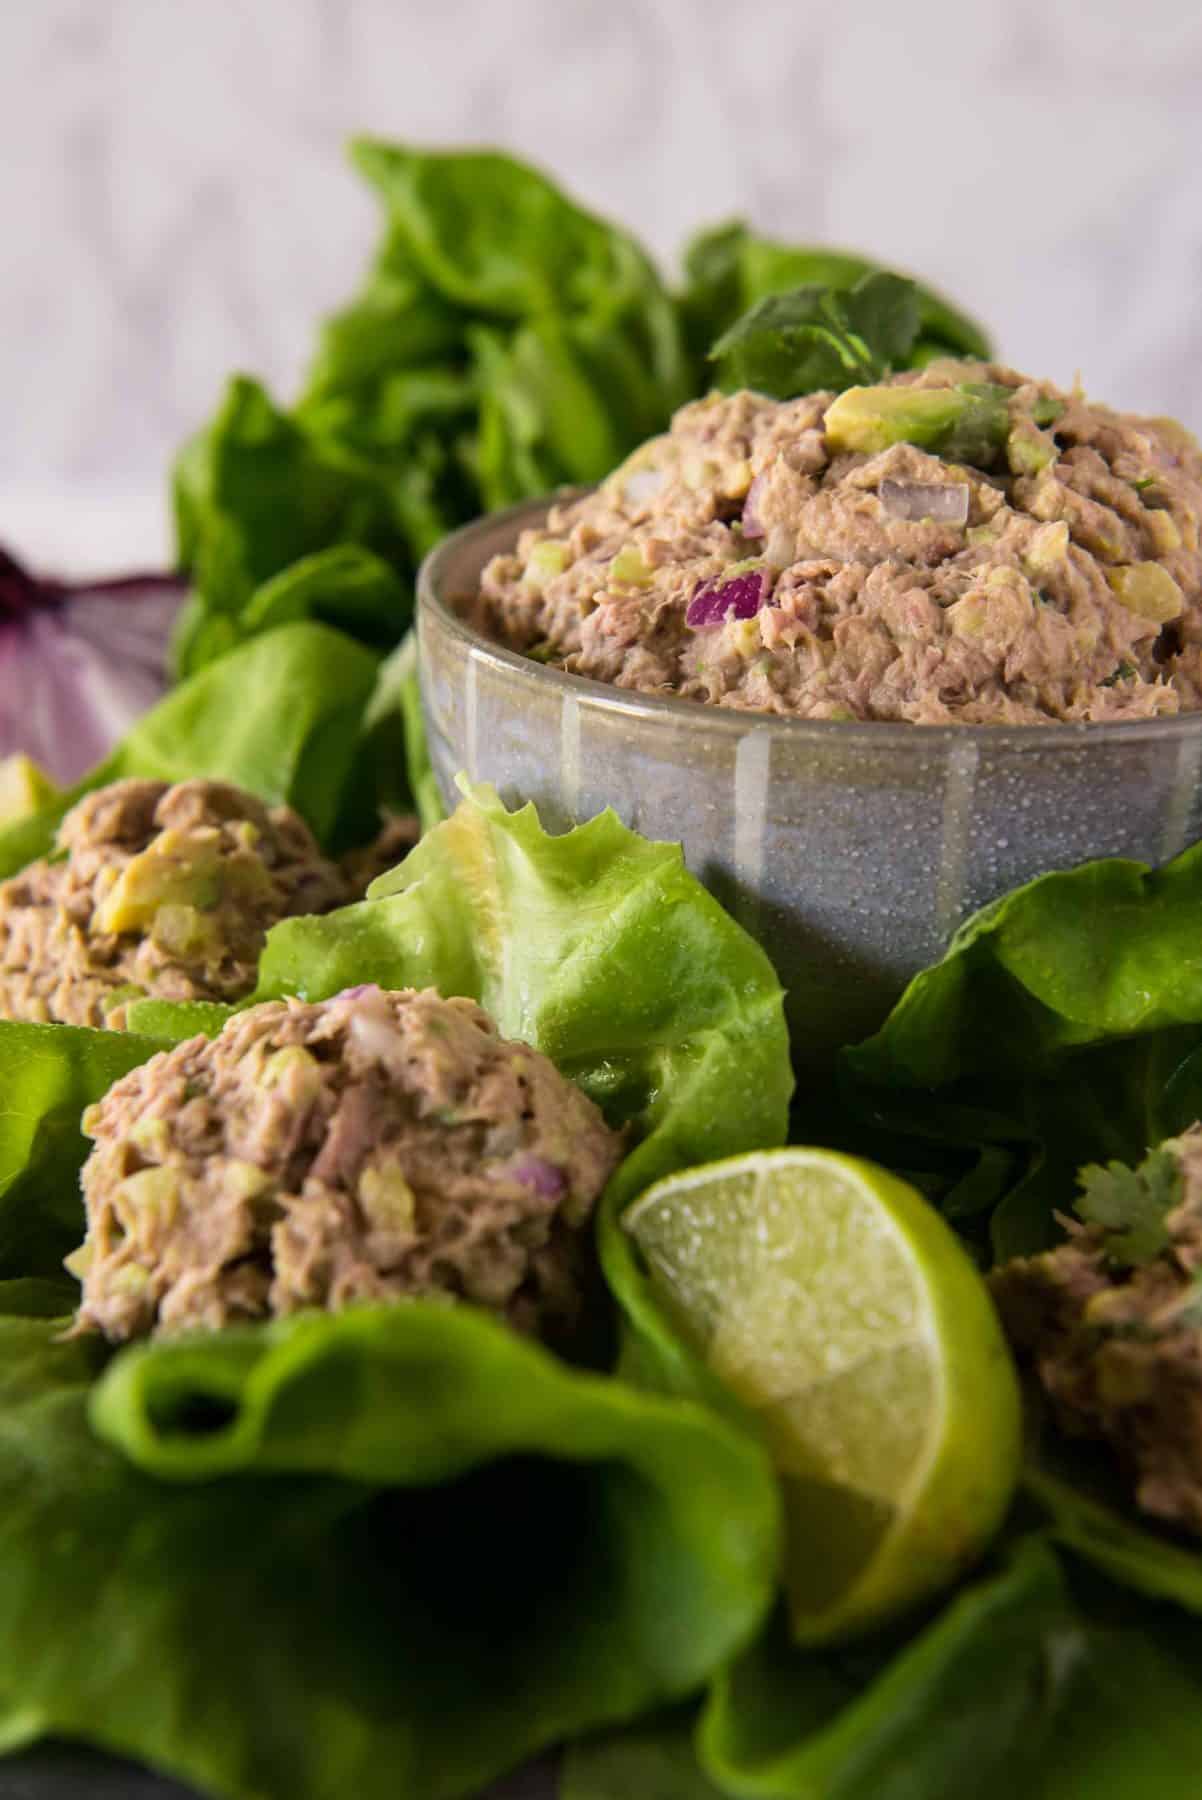 A bowl of avocado tuna salad with lime wedges on a bed of lettuce leaves, garnished with red onion slices.